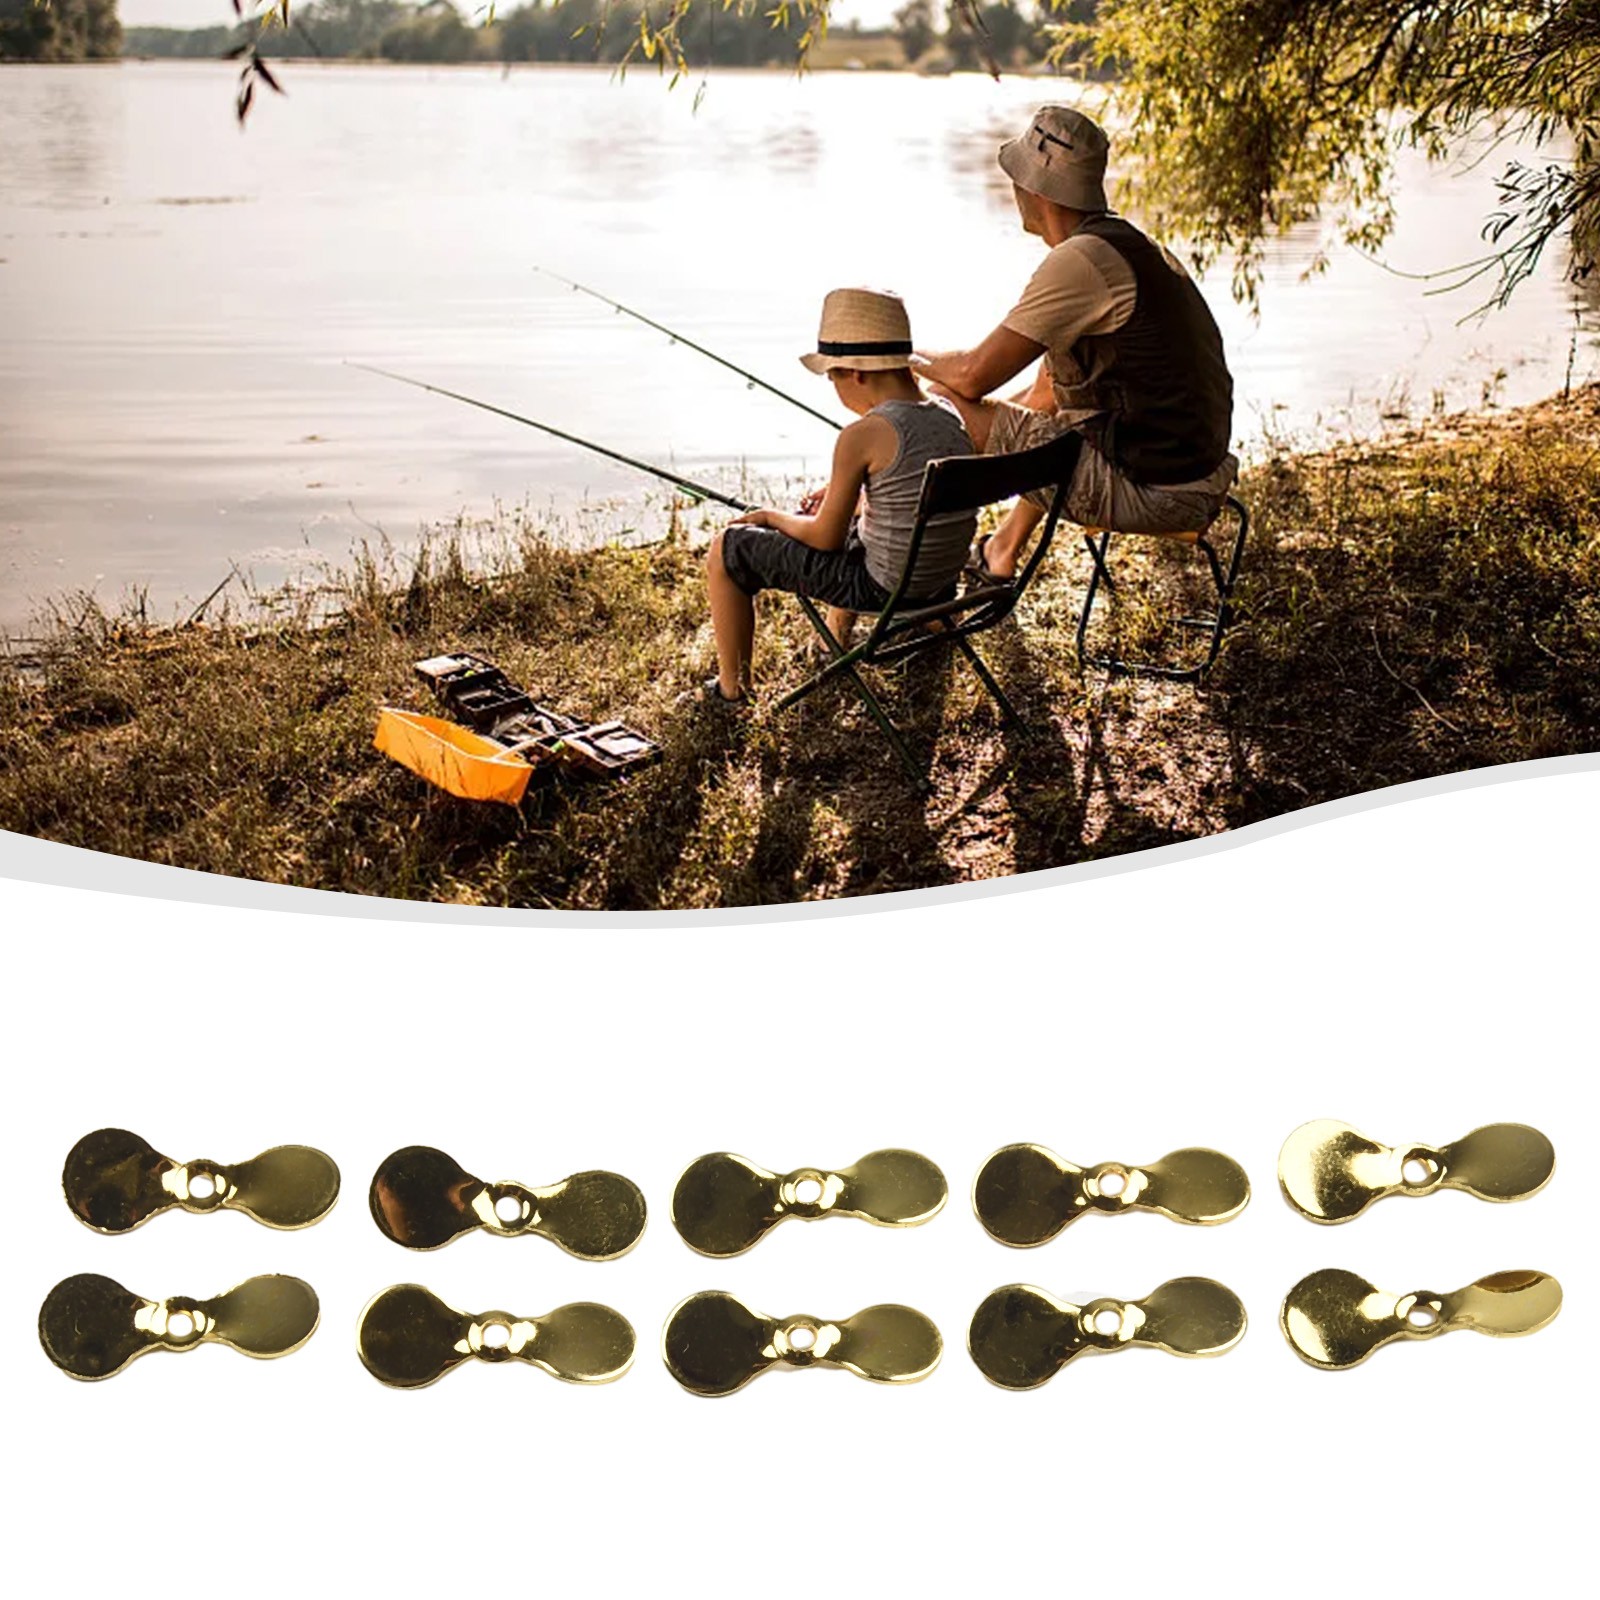 Boost Your Fish Catching Rate with Reflective Fishing Propeller